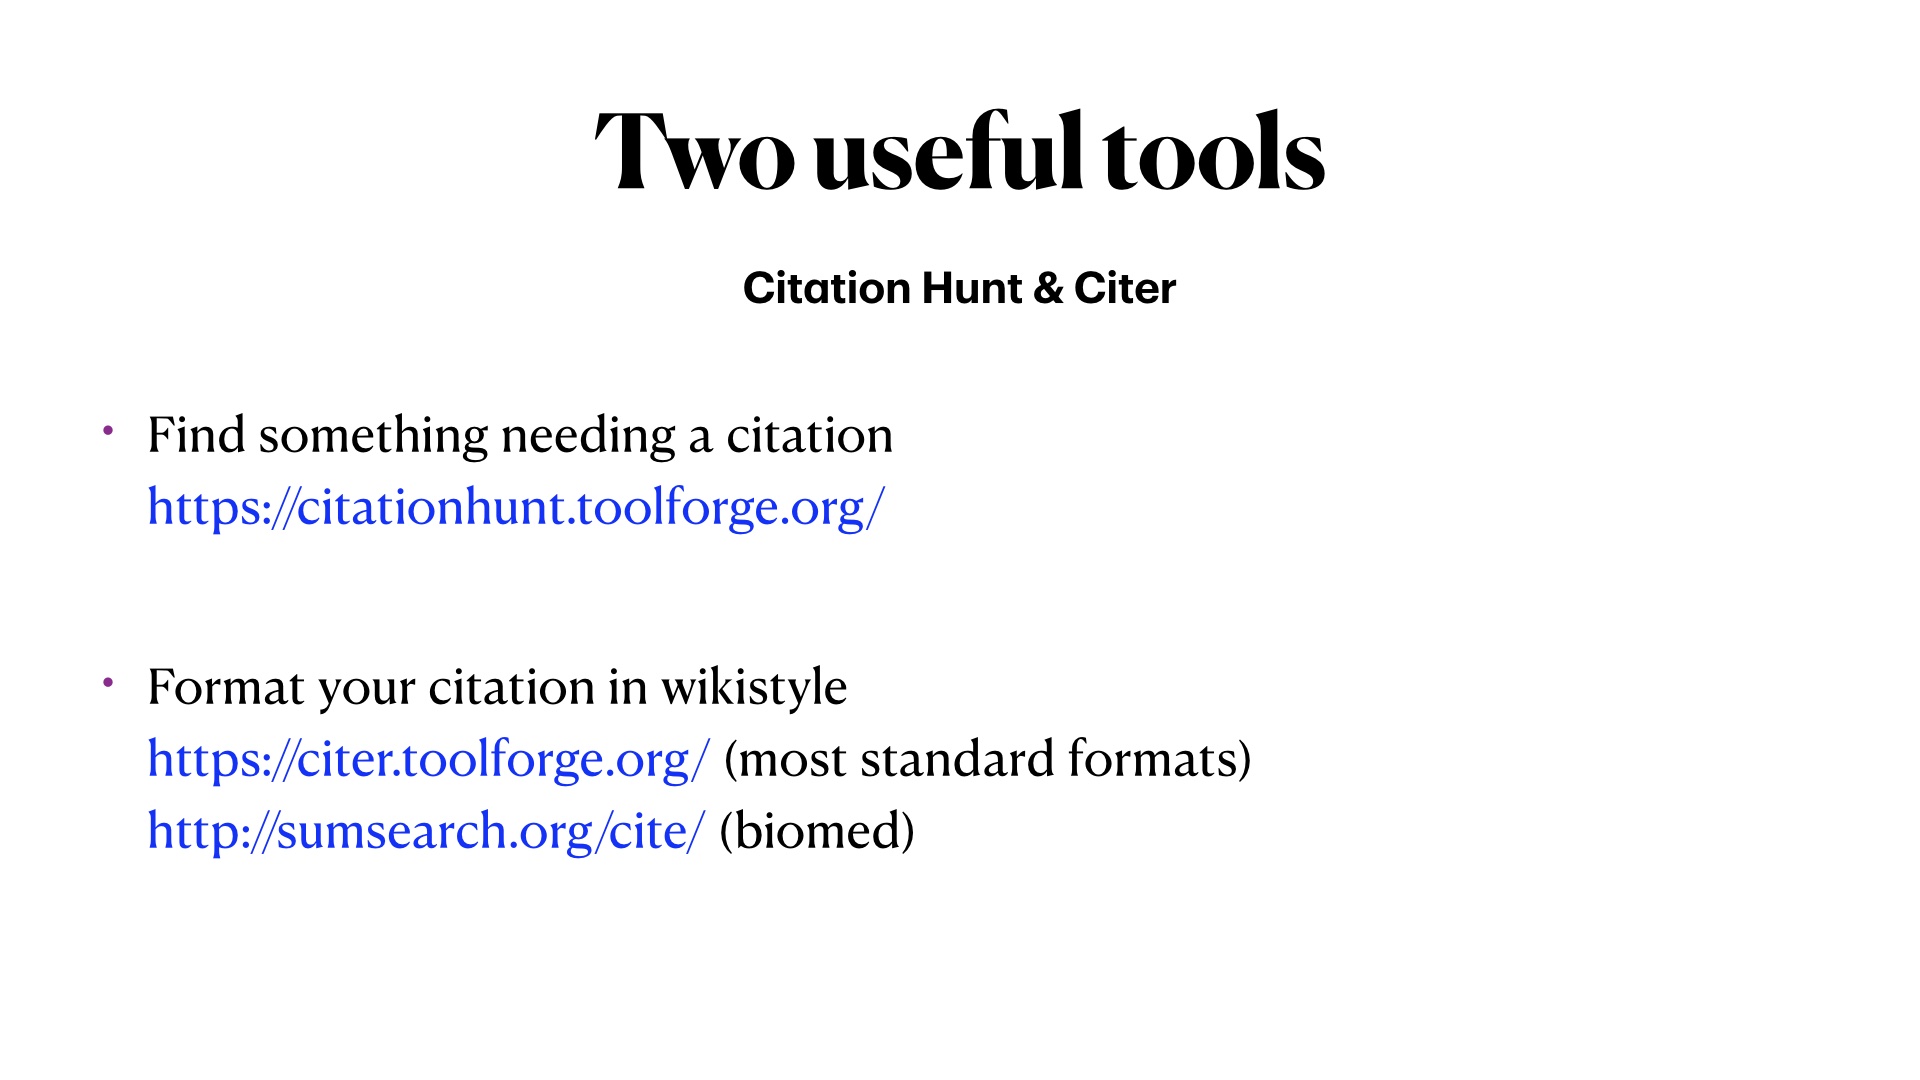 Two useful tools: Citation Hunt for finding articles needing citations and Citer which can format your citations in Wikistyle